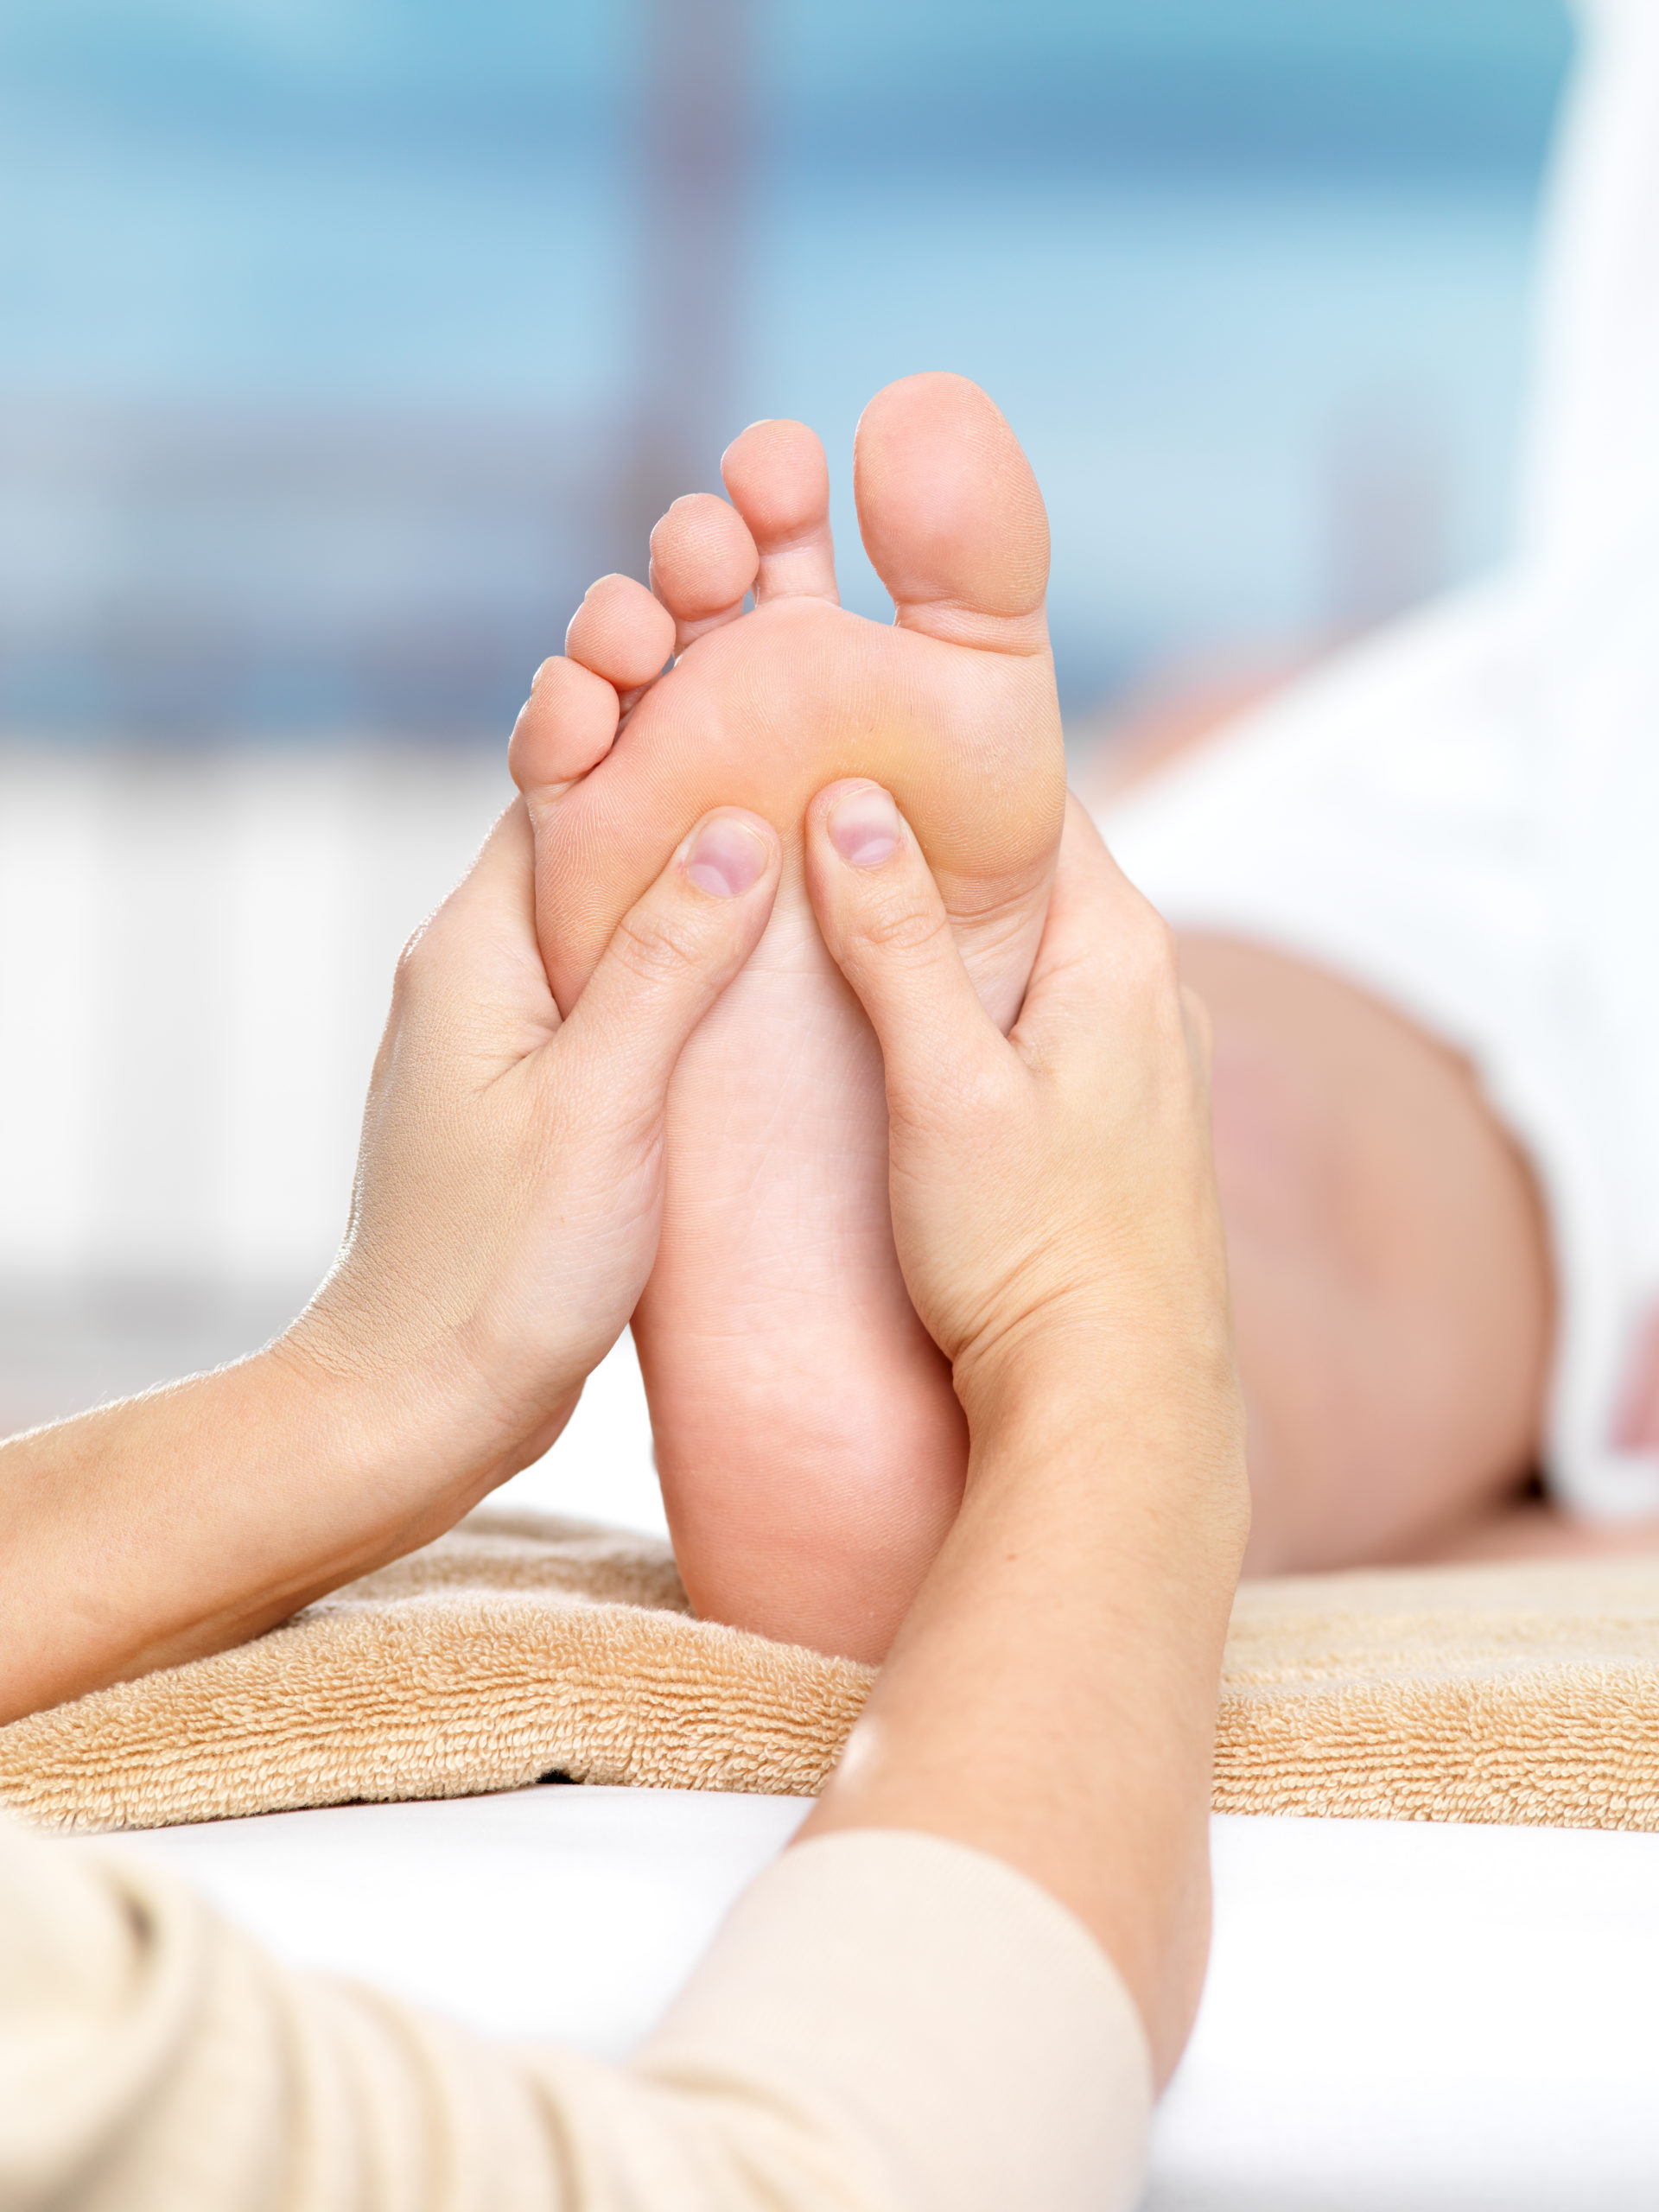 Massage on the foot in spa salon, close-up shot - colored background